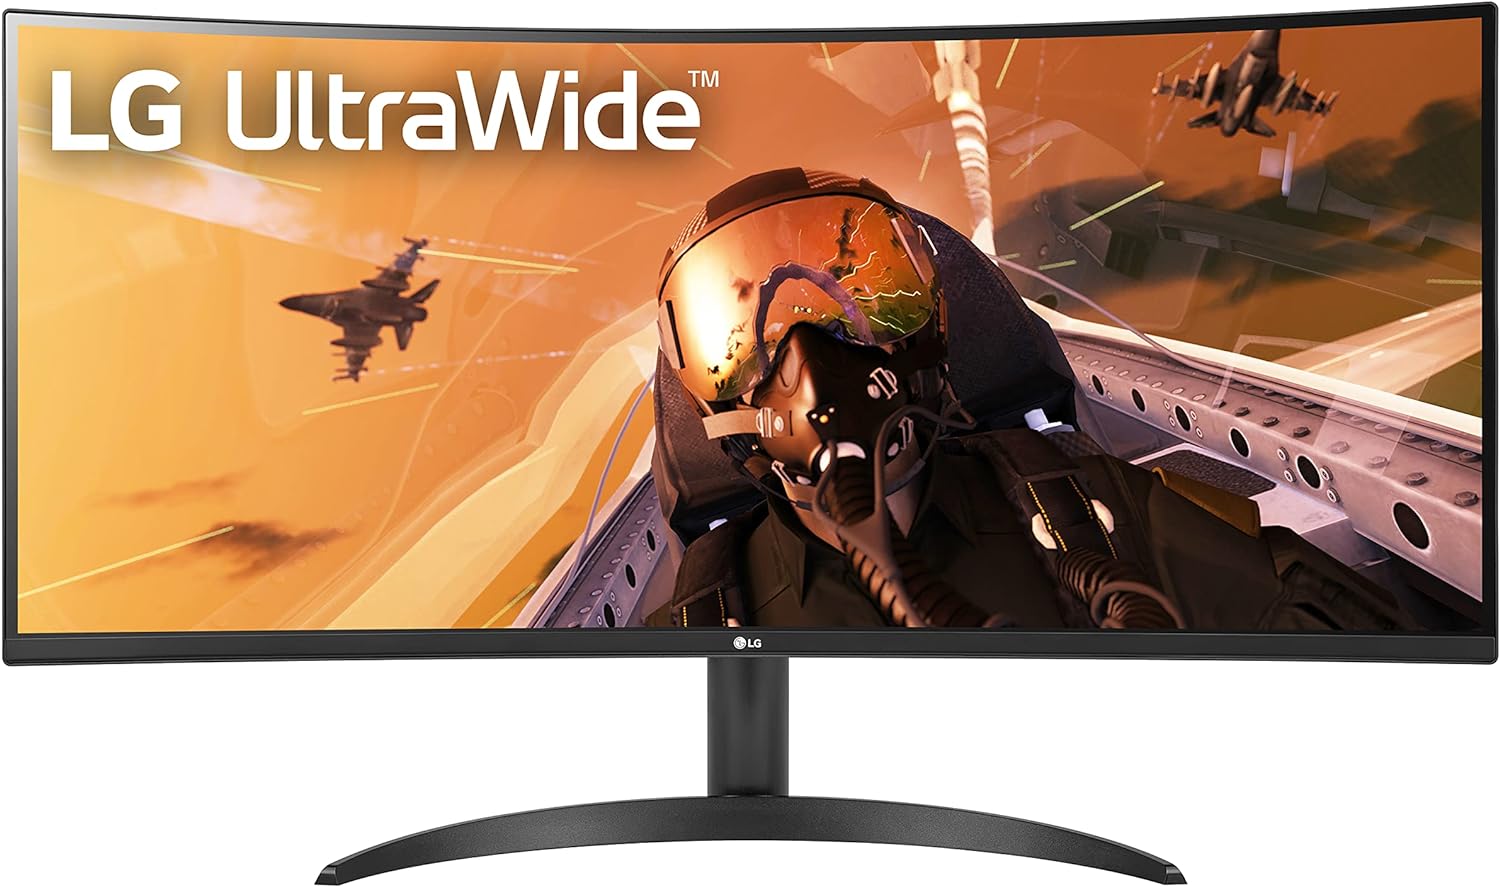 Limited-time deal: LG 34WP60C-B 34-Inch 21:9 Curved UltraWide QHD (3440x1440) VA Display with sRGB 99% Color Gamut and HDR 10, AMD FreeSync Premium and 3-Side Virtually B